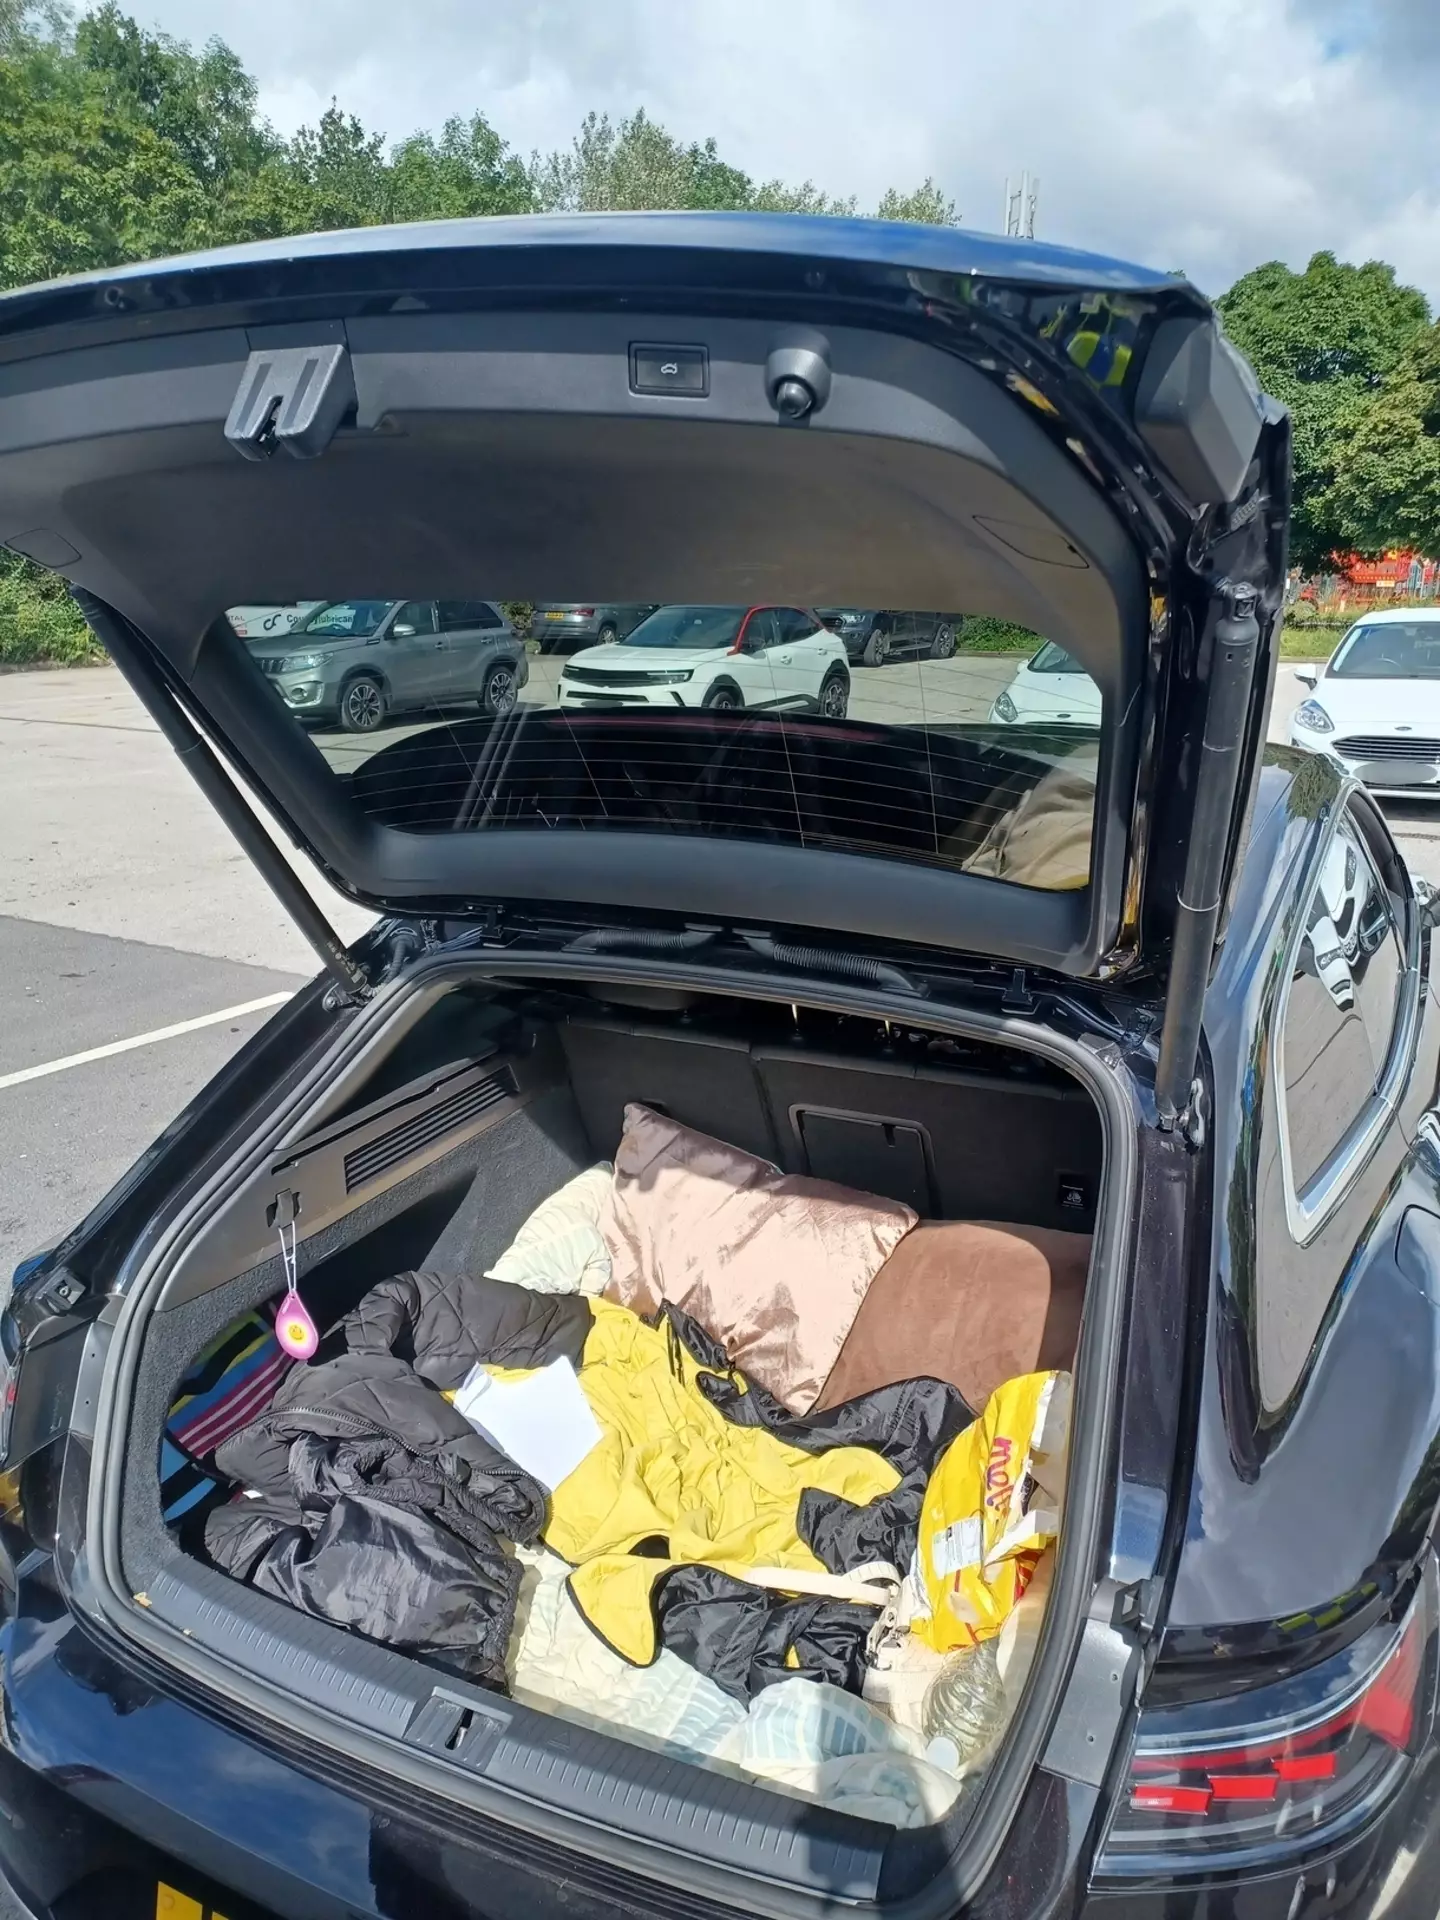 Two children were discovered in the boot of the car.